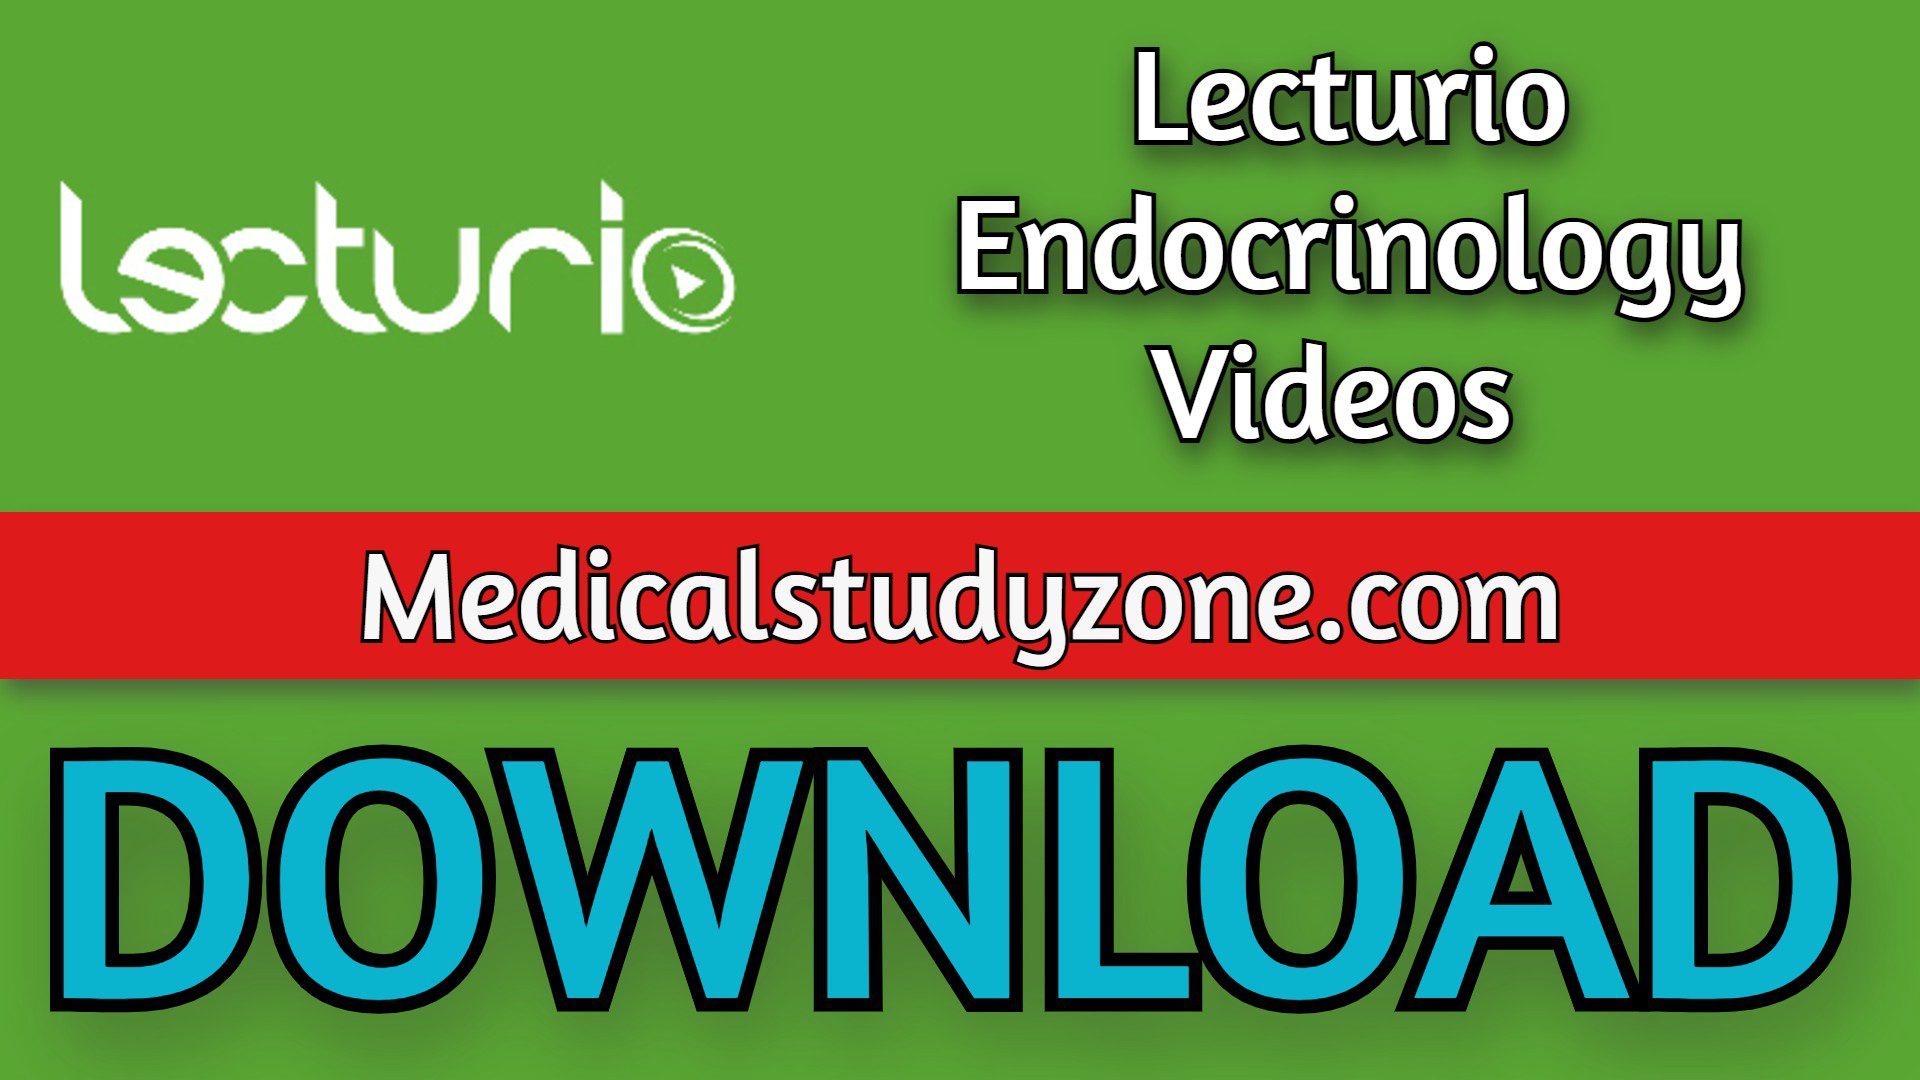 Lecturio Endocrinology Videos 2021 Free Download